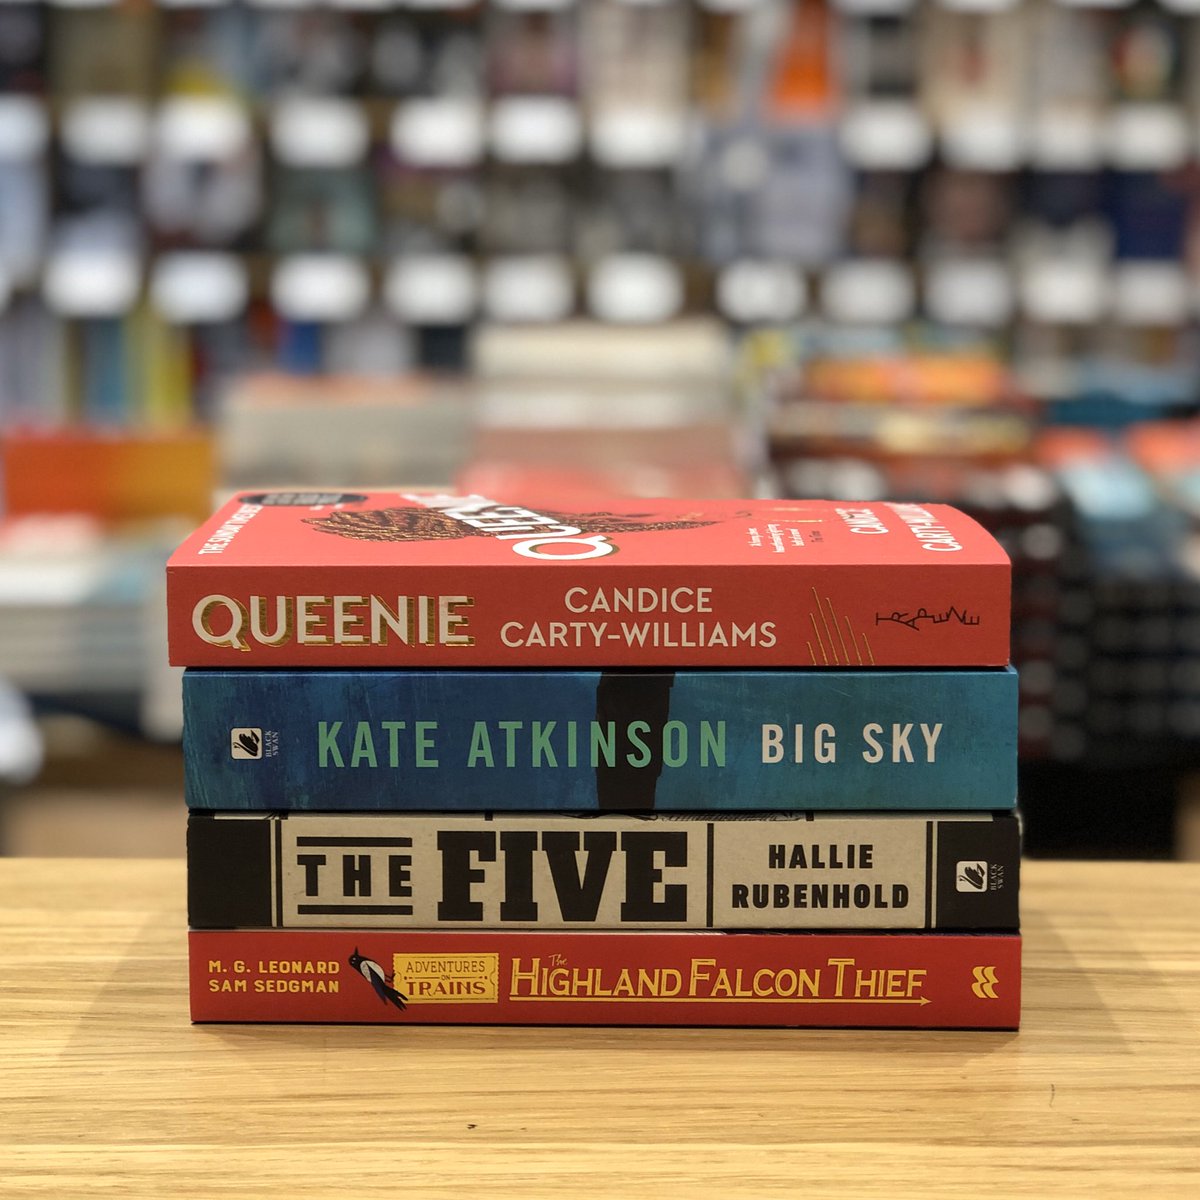 New month means new books of the month! Watch this space to find out more about these wonderful reads.
#treatyourshelf #queenie #bigsky #thefive #thehighlandfalconthief #wbotm #botm #kateatkinson